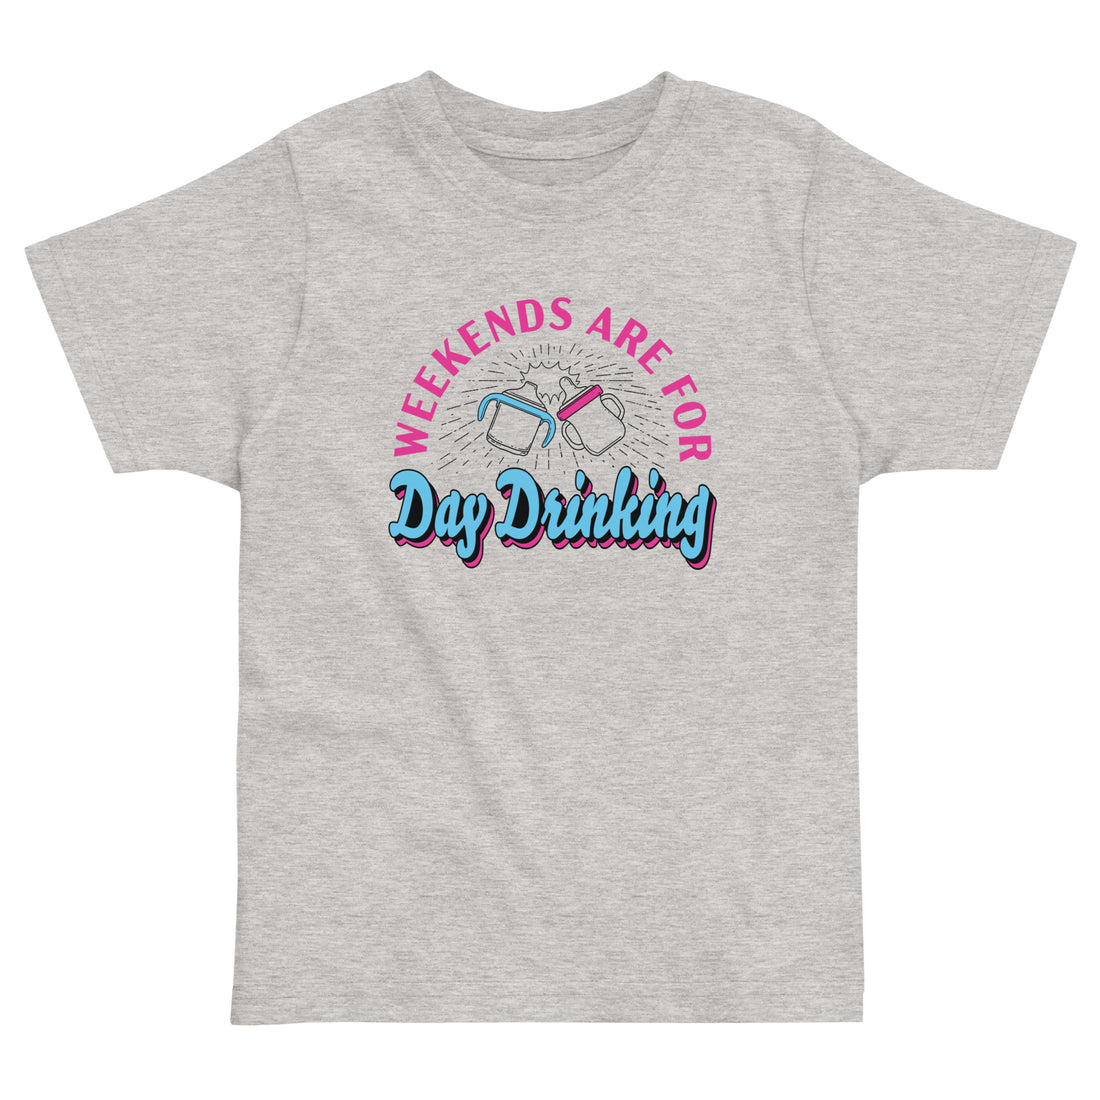 Weekends are for Day Drinking Toddler Shirt by Some Good Hops - Grey